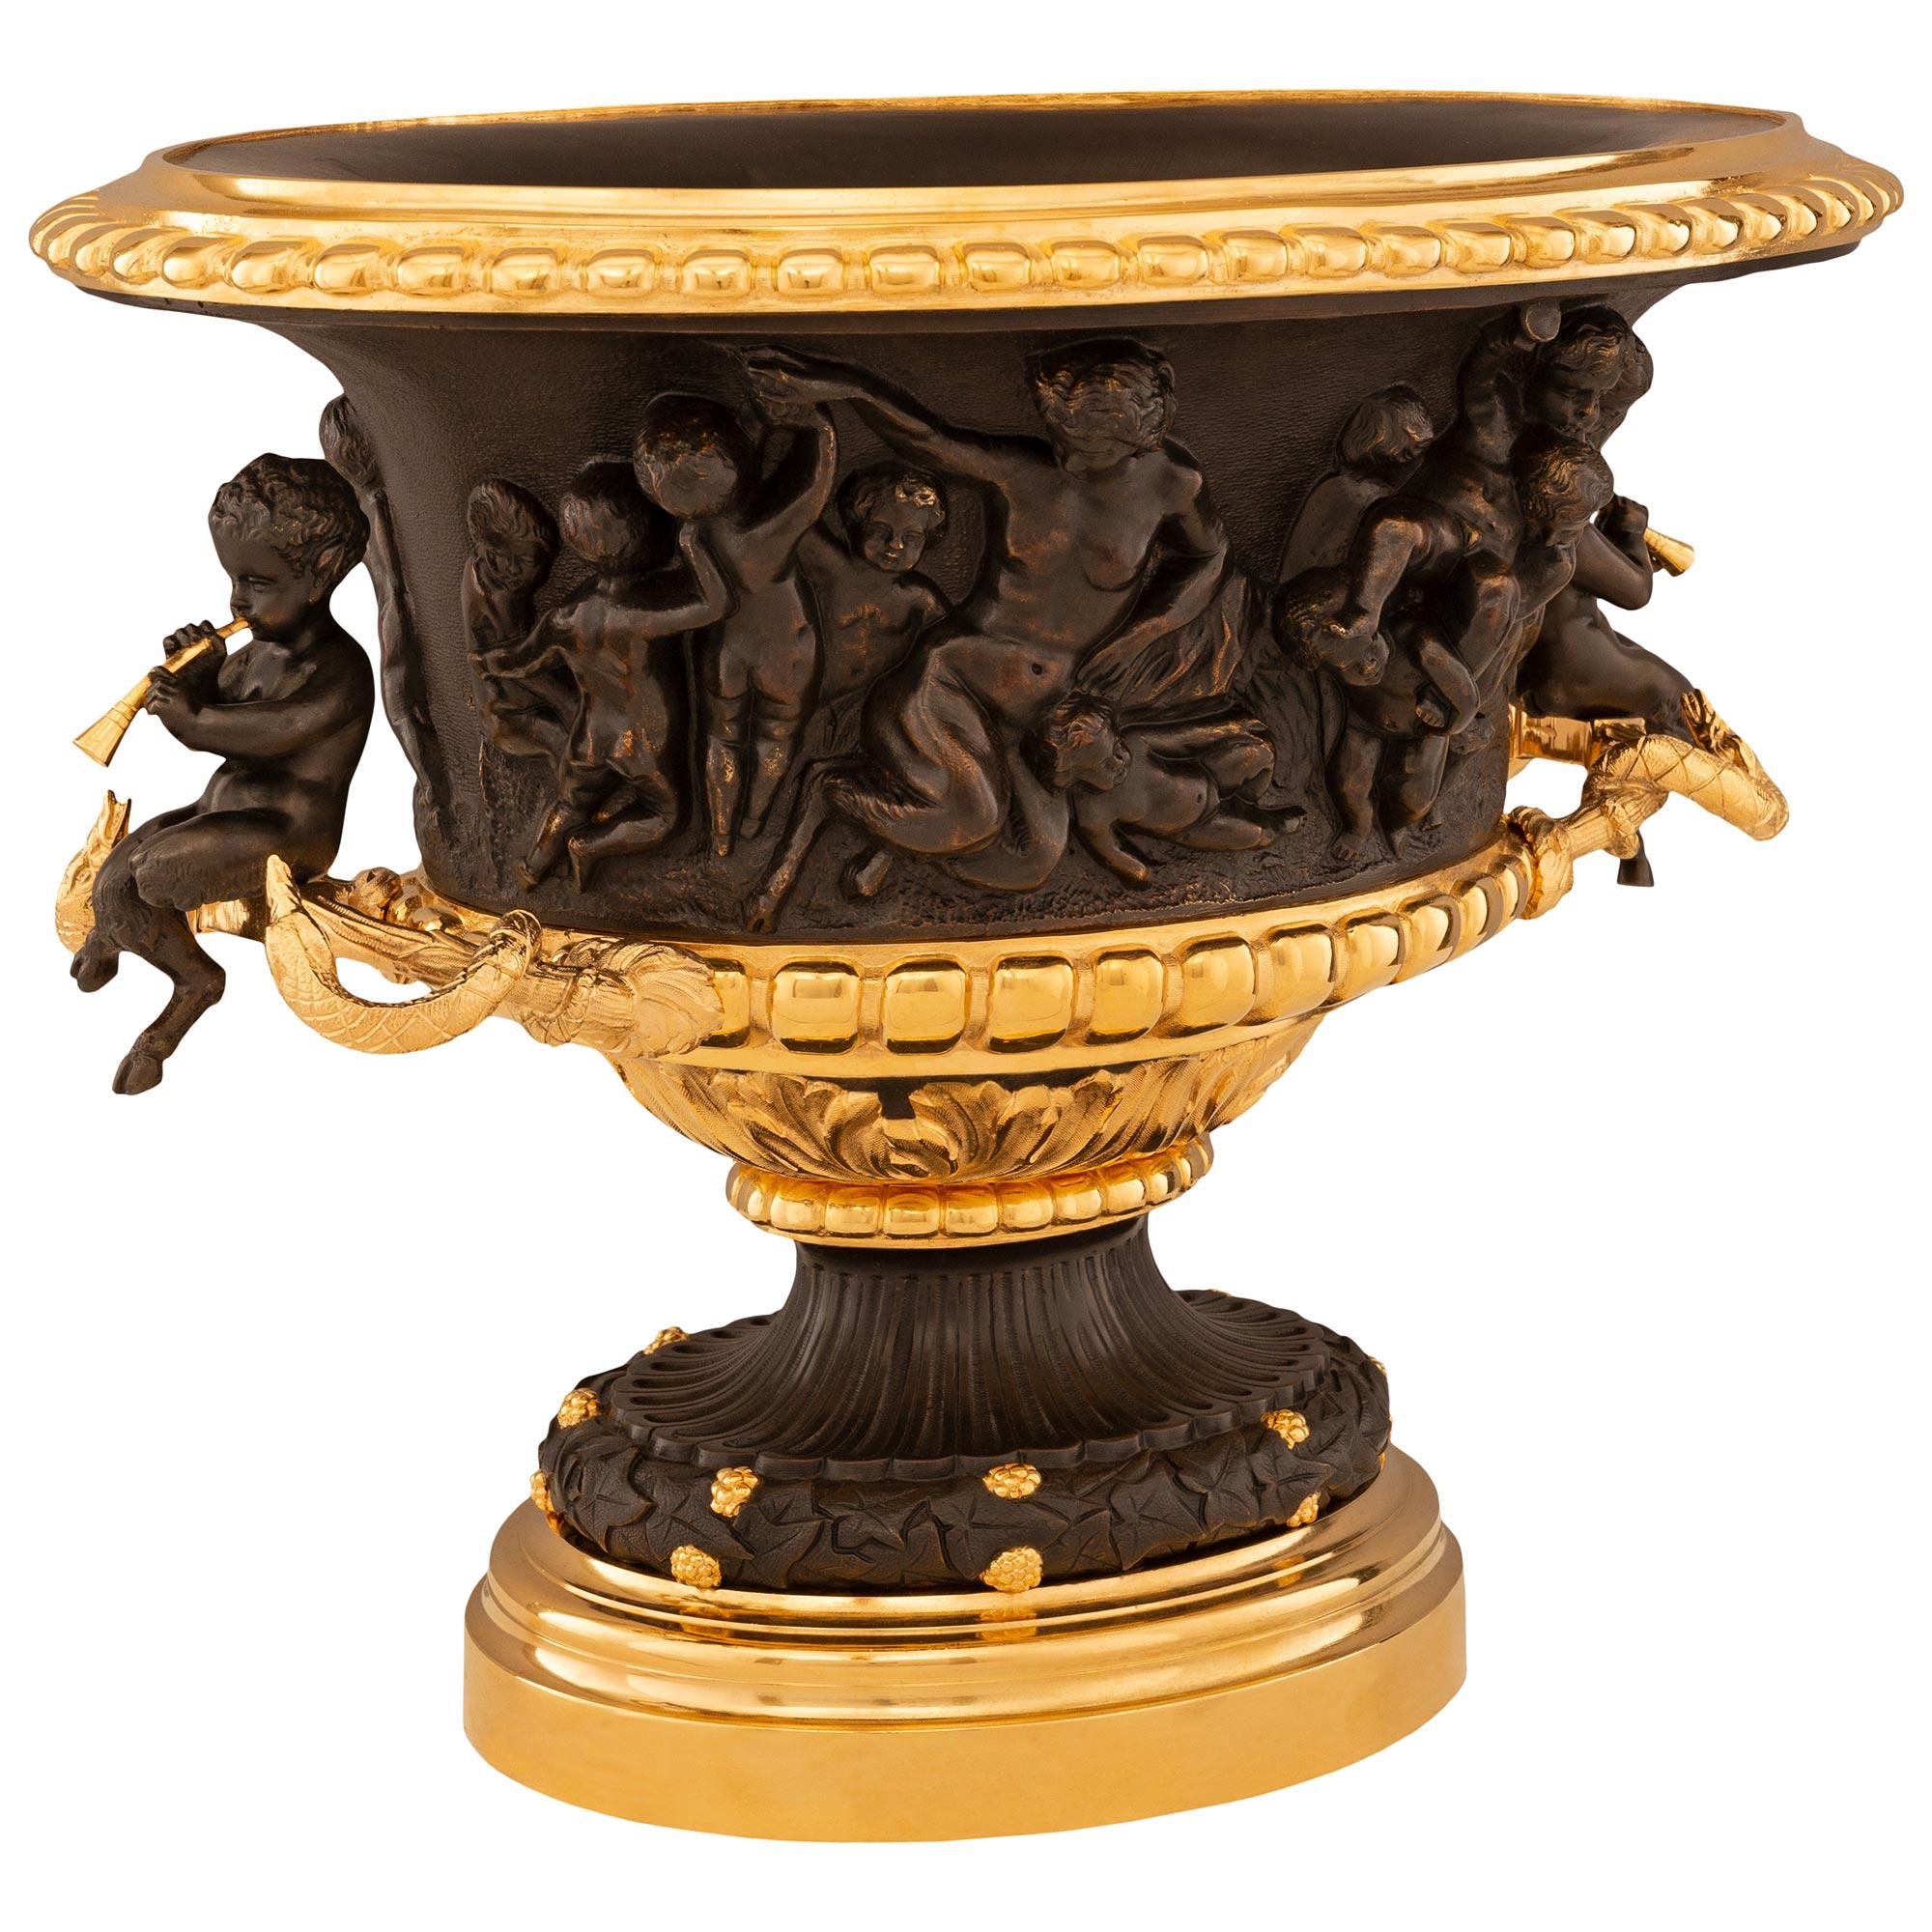 An elegant and high quality French 19th century Renaissance st. patinated Bronze and Ormolu centerpiece/urn. This beautifully detailed urn is raised by a circular mottled and stepped Ormolu base. Above the Ormolu base is a patinated Bronze fluted